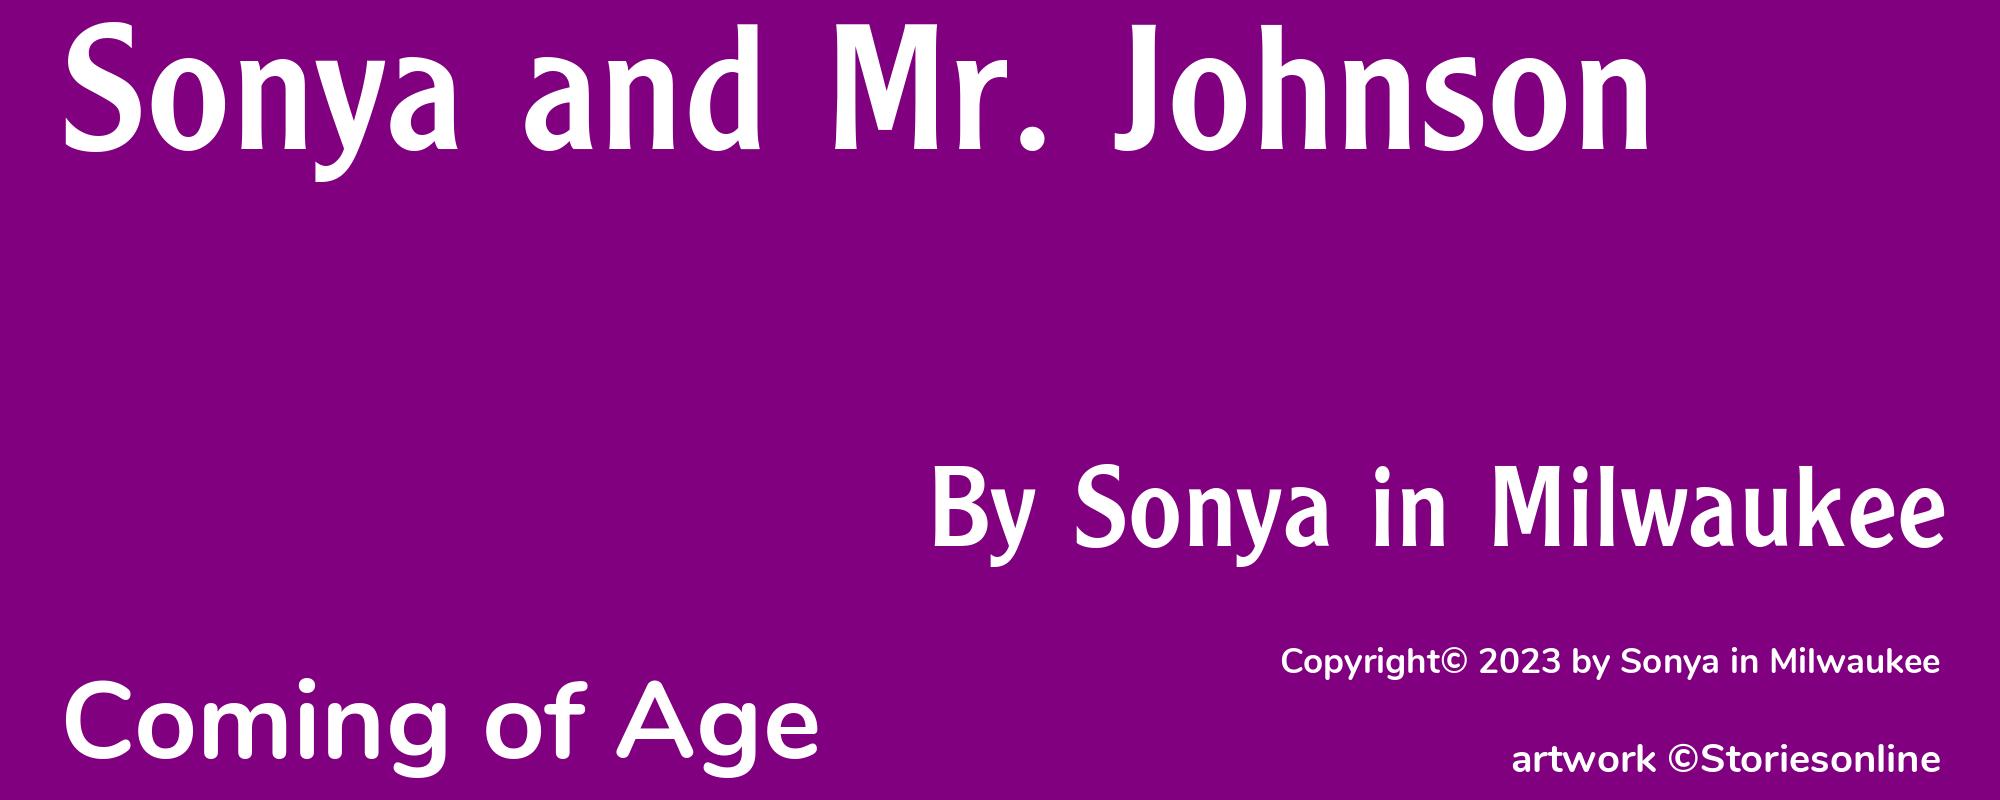 Sonya and Mr. Johnson - Cover